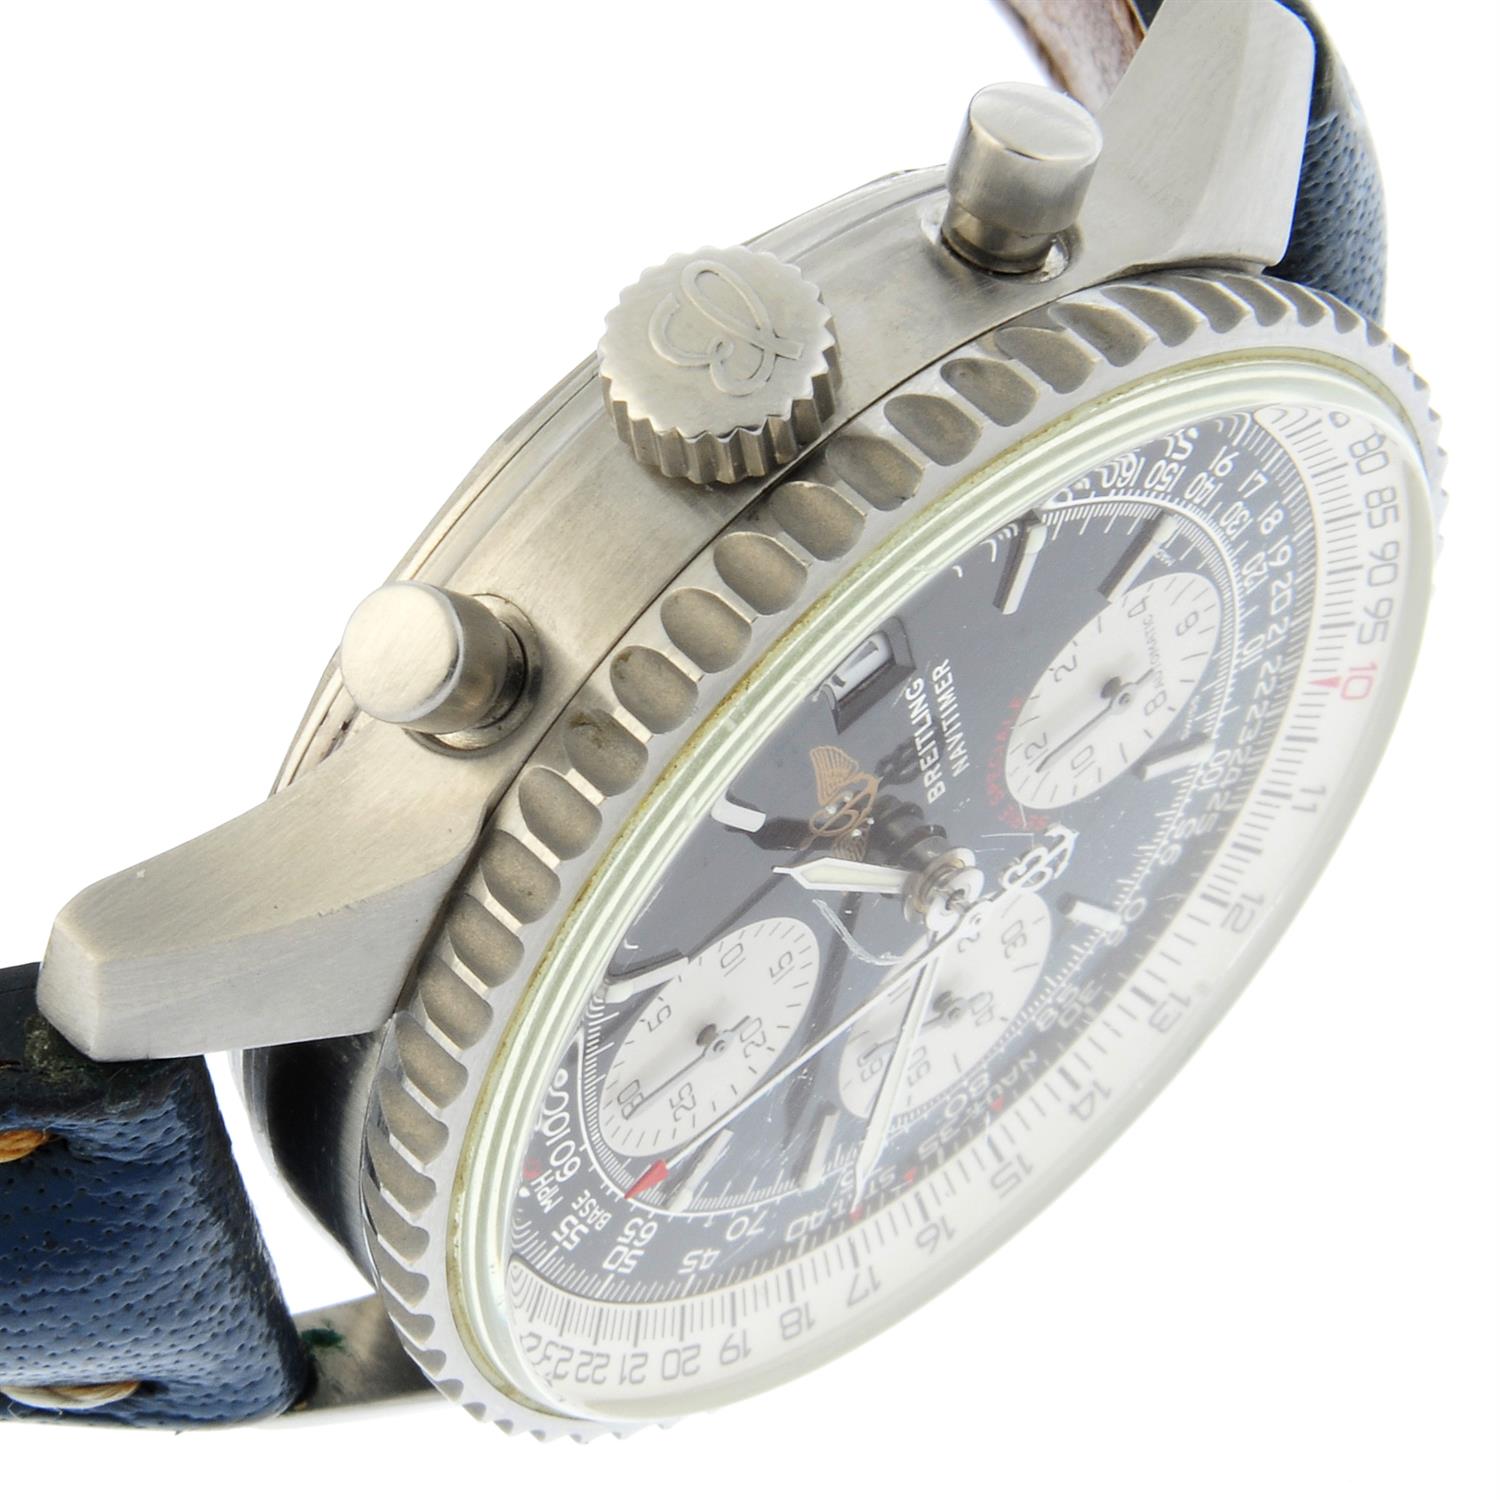 Breitling - a Navitimer Fighters watch, 41.5mm. - Image 3 of 6